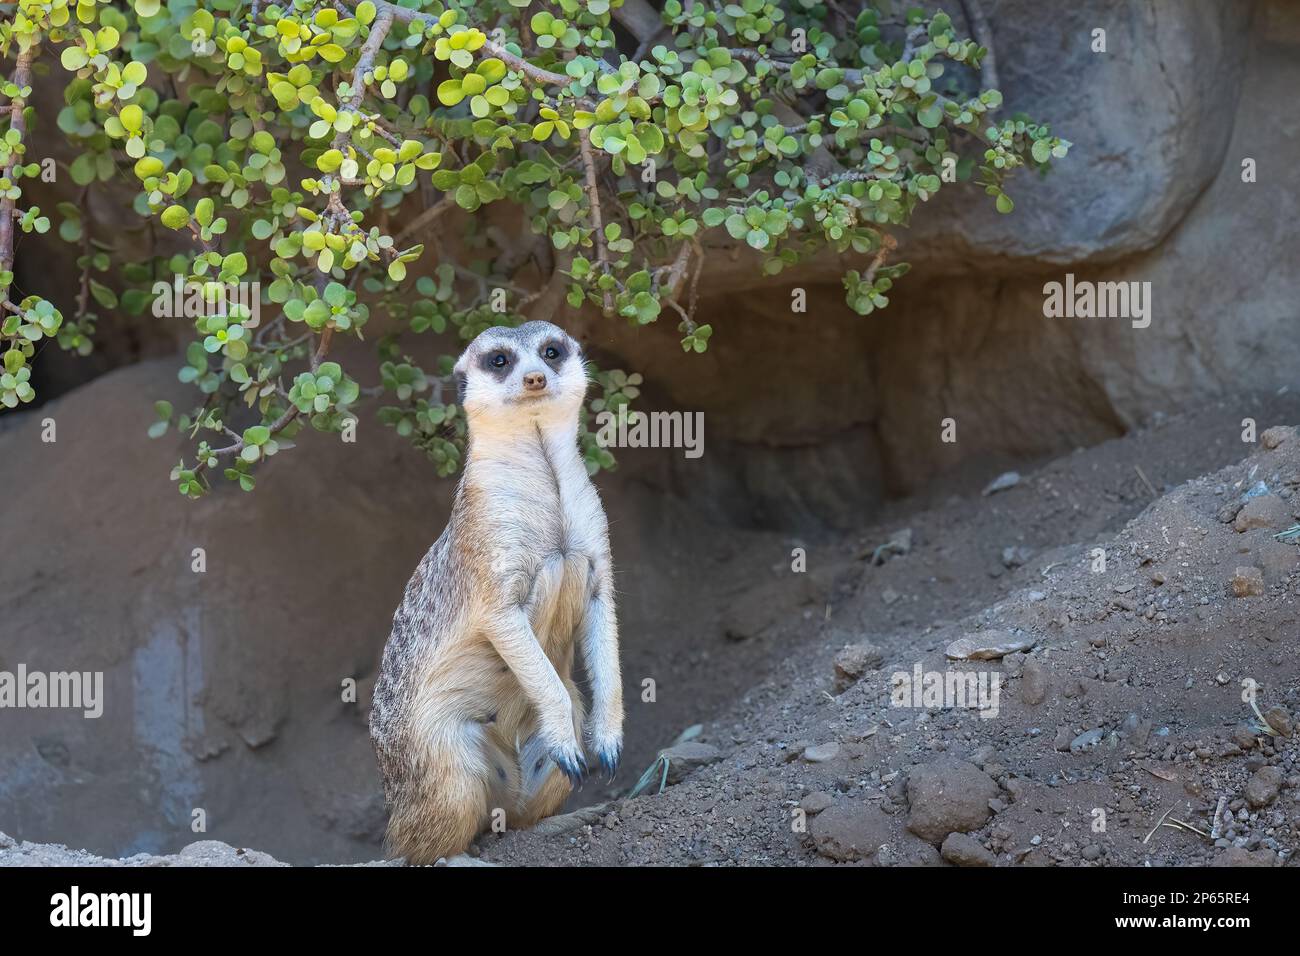 An adorable meerkat is standing upright on its hind legs as it surveys a scenic savannah landscape with trees in the backdrop Stock Photo